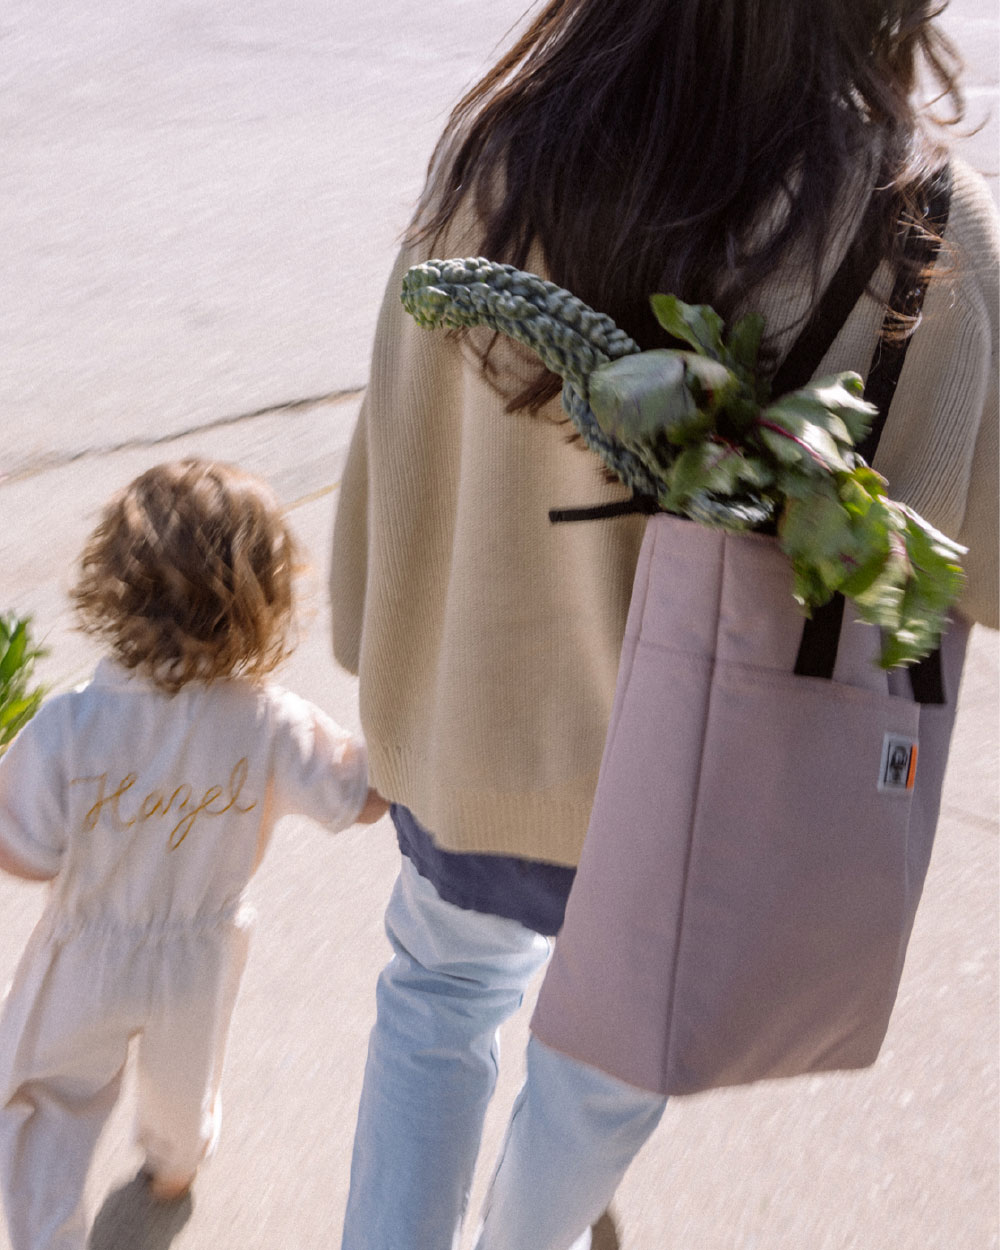 woman with a insulated tote full of groceries walks with her infant daughter.